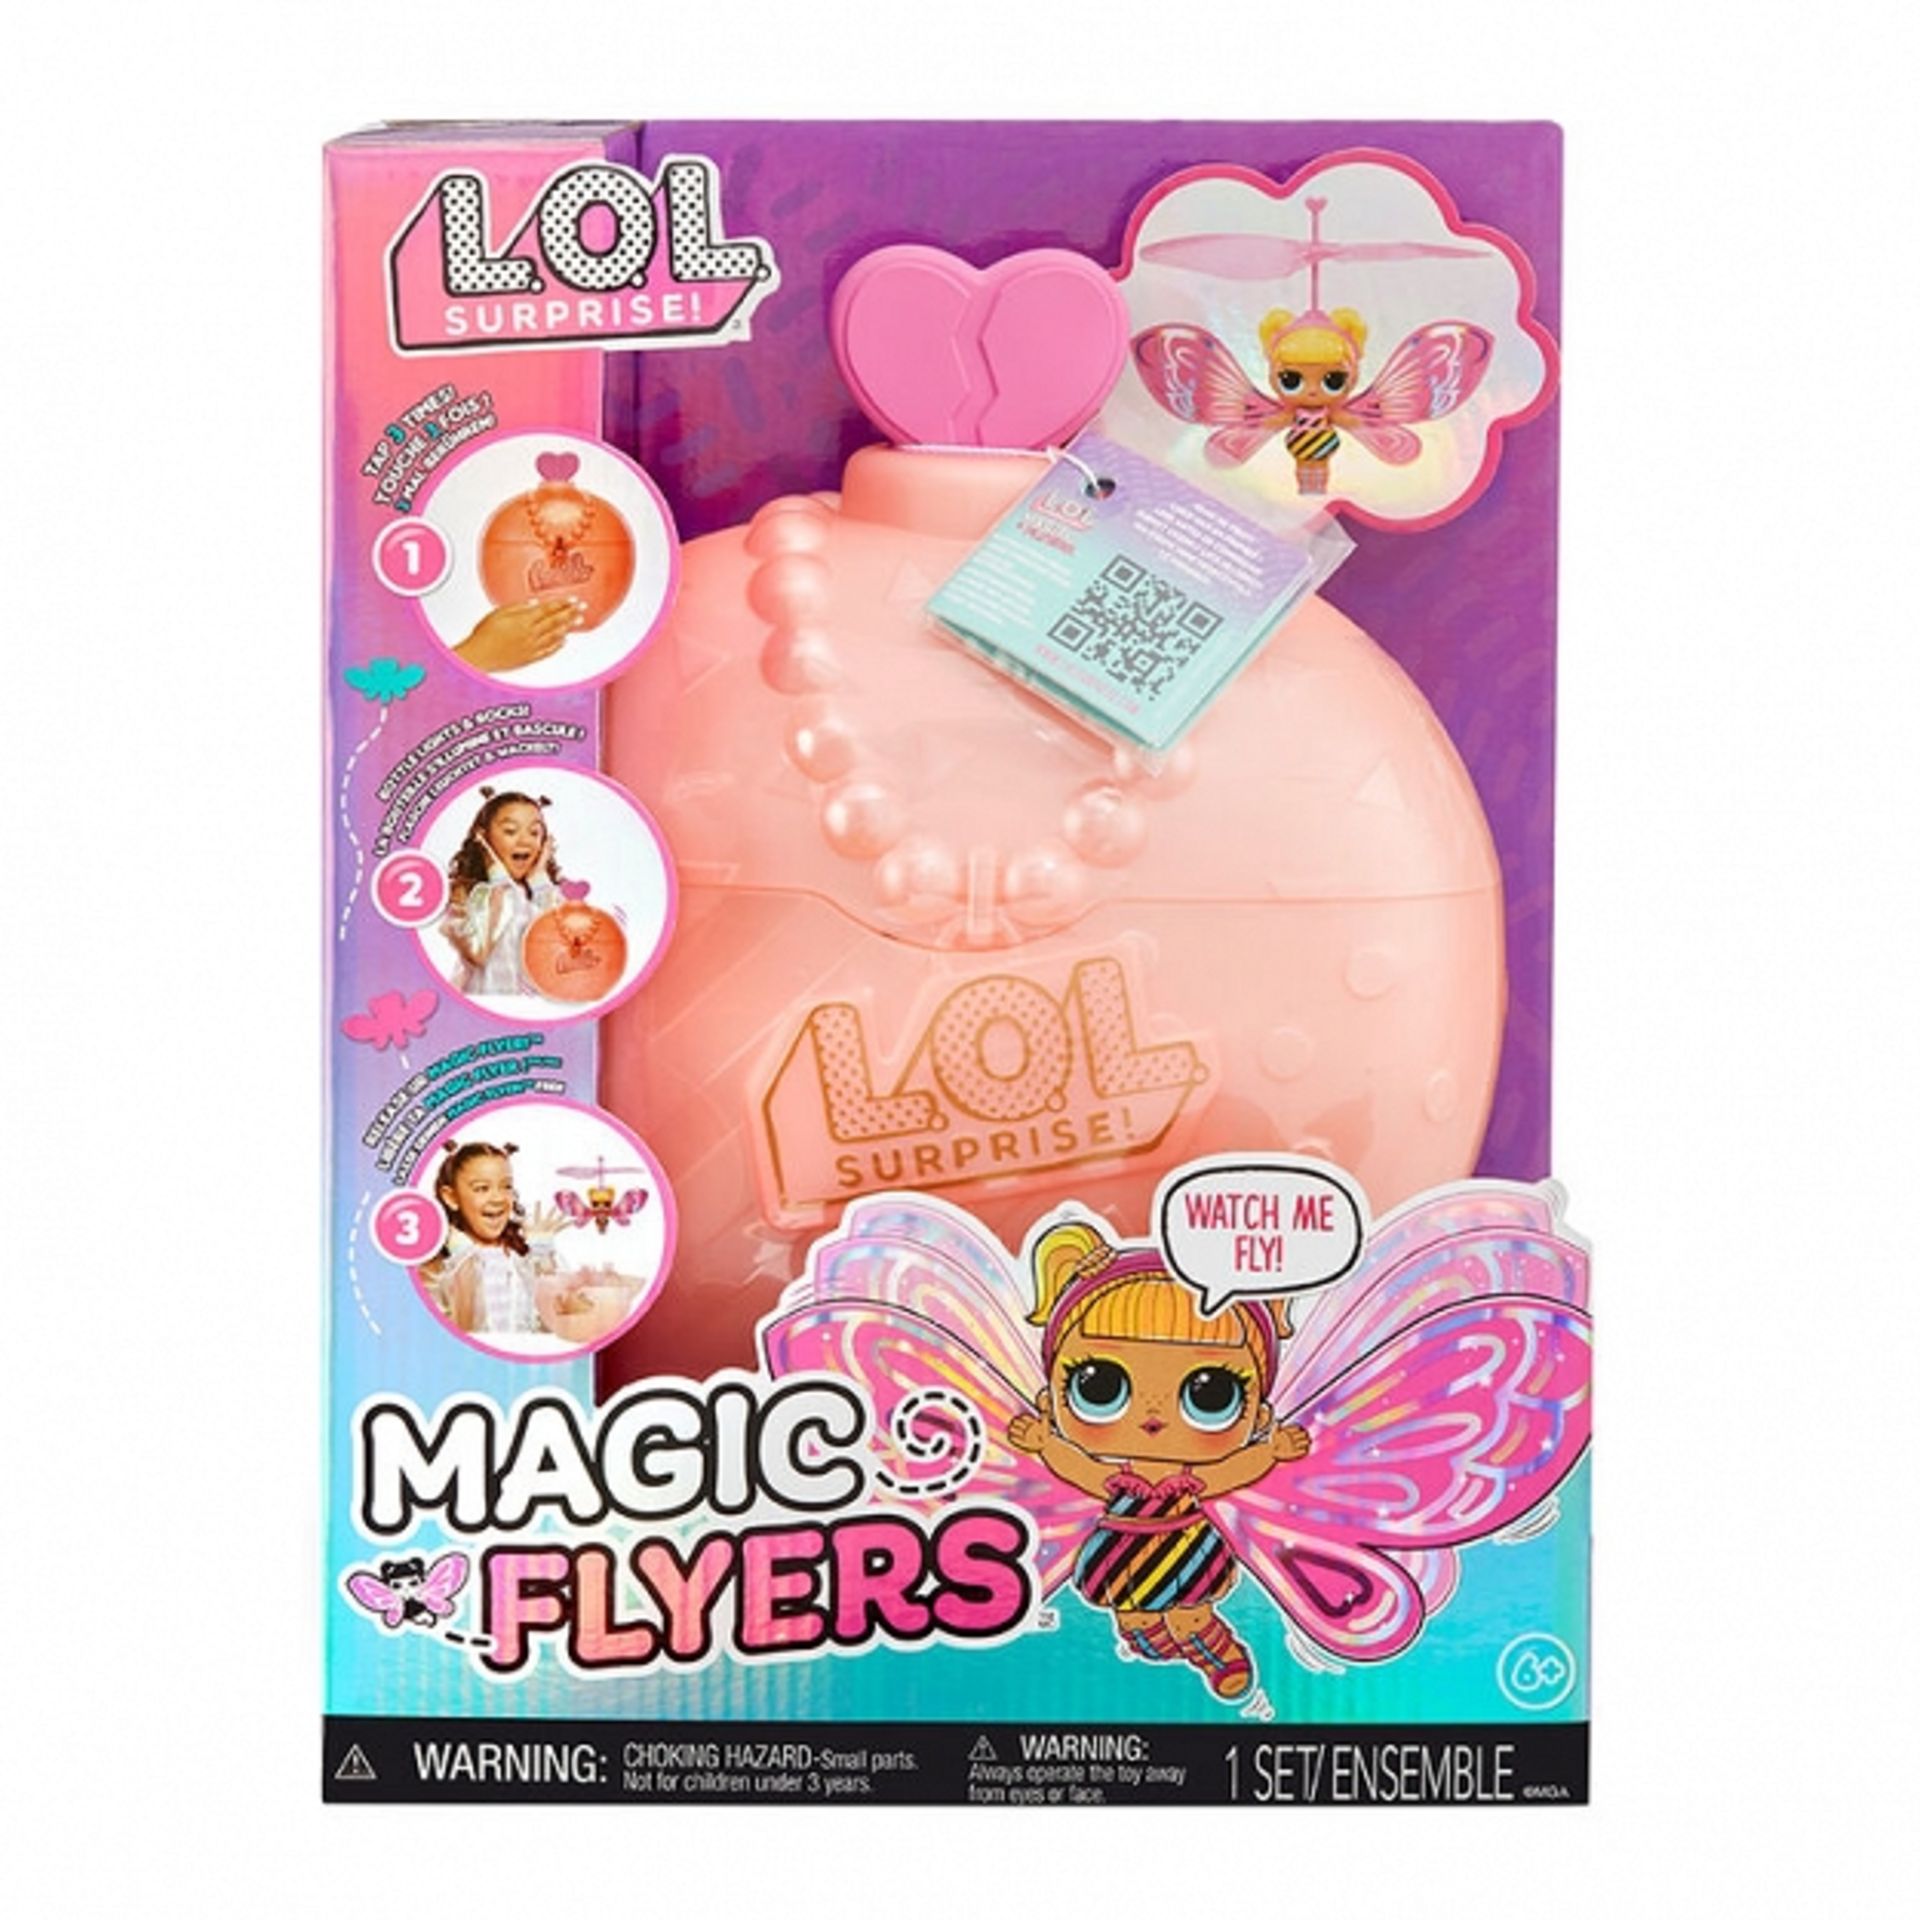 L.O.L Surprise Magic Flyers Fairy Pink. - ER22. The adorable doll with pink wings comes in a